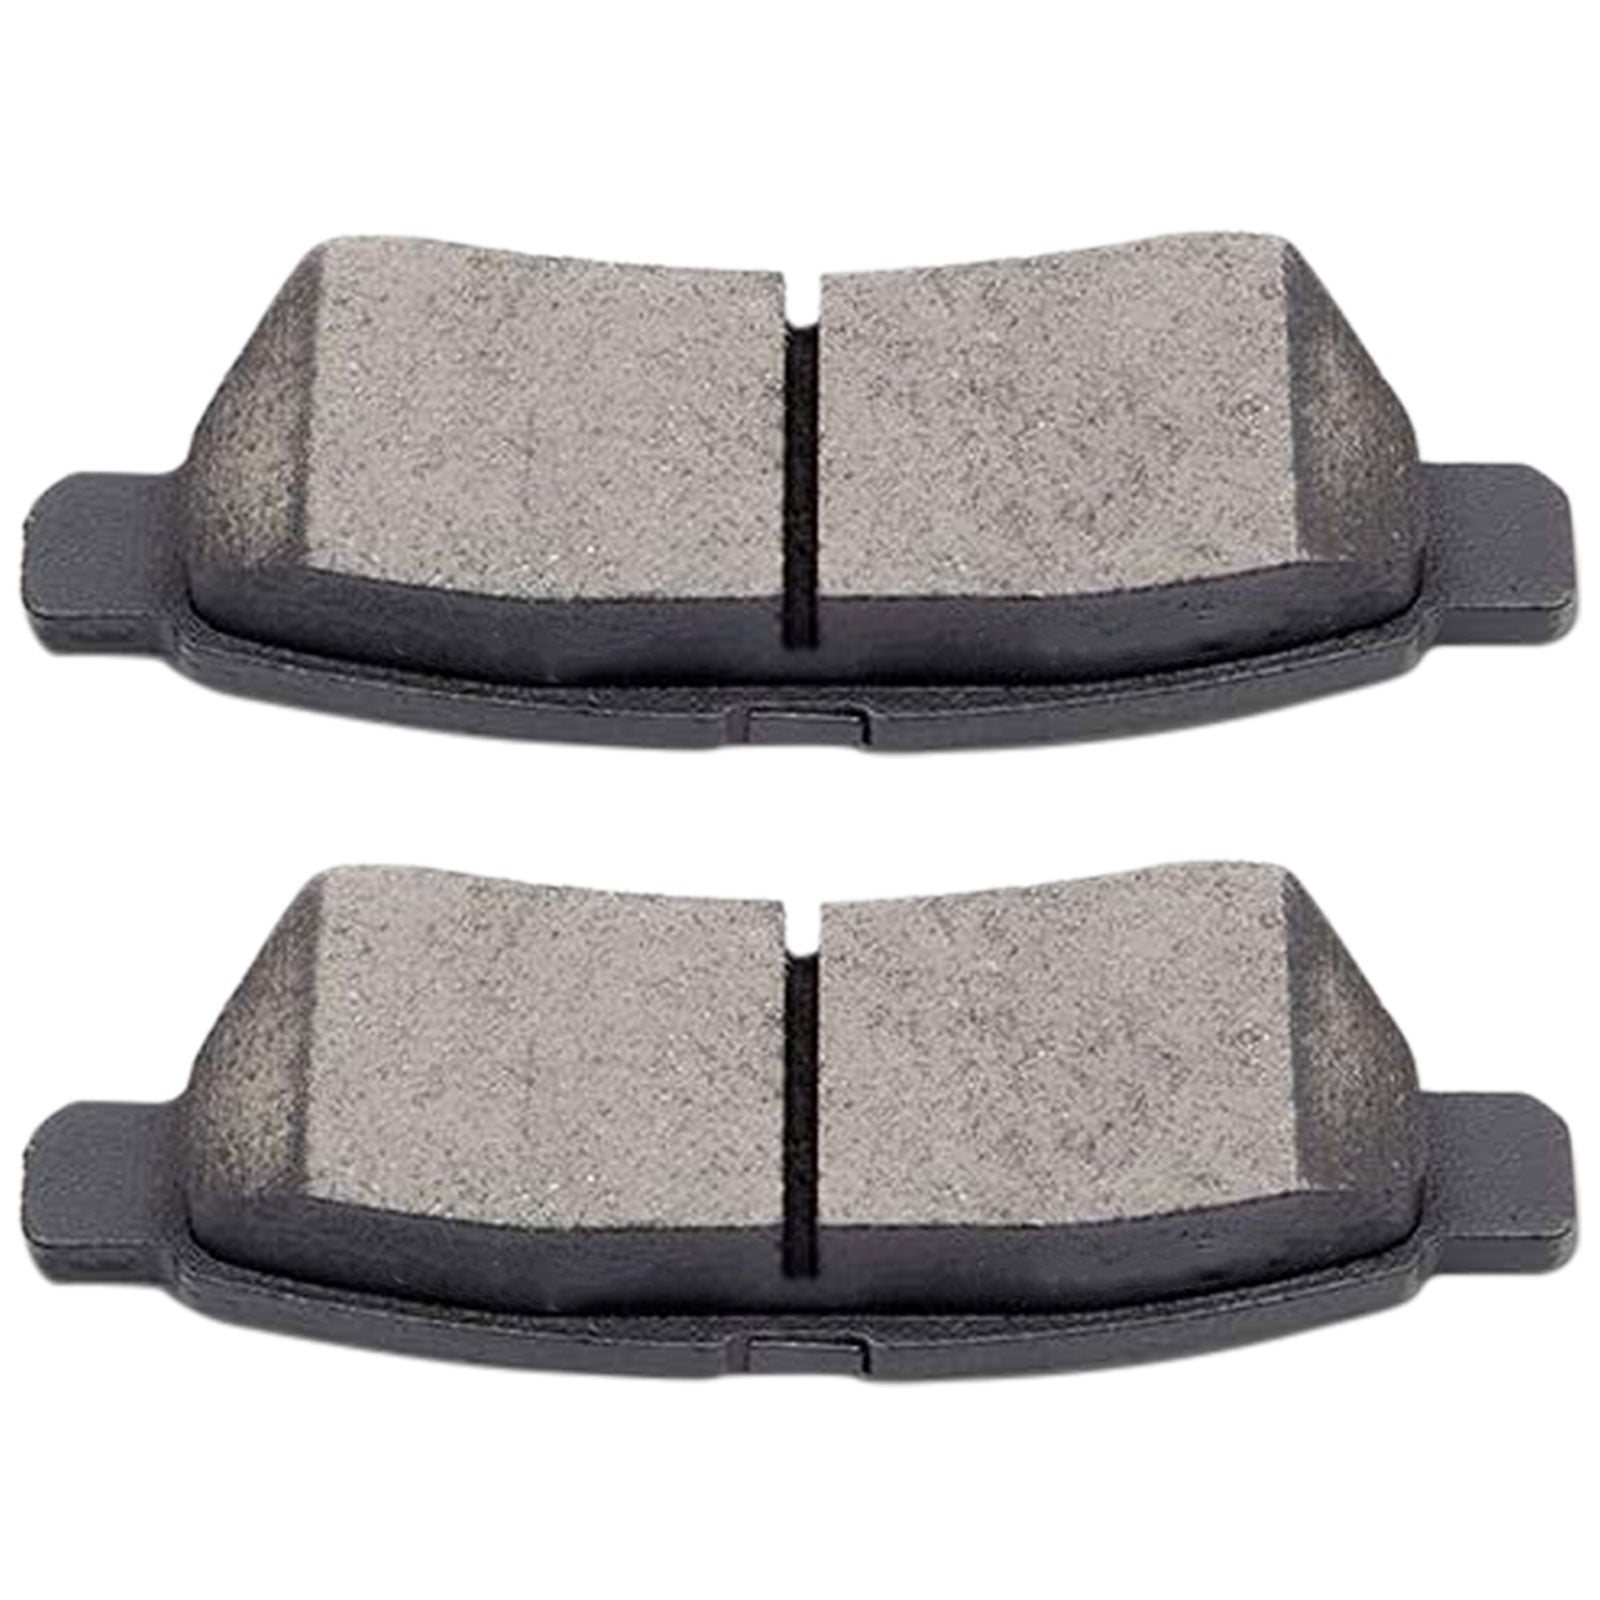 4PC Rear Ceramic Brake Pads with Hardware Kits Fits for Nissan Frontier 2005-2009, Nissan Xterra 2005-2015, Suzuki Equator 2009-2012 Low Dust Brake Pad MotorbyMotor